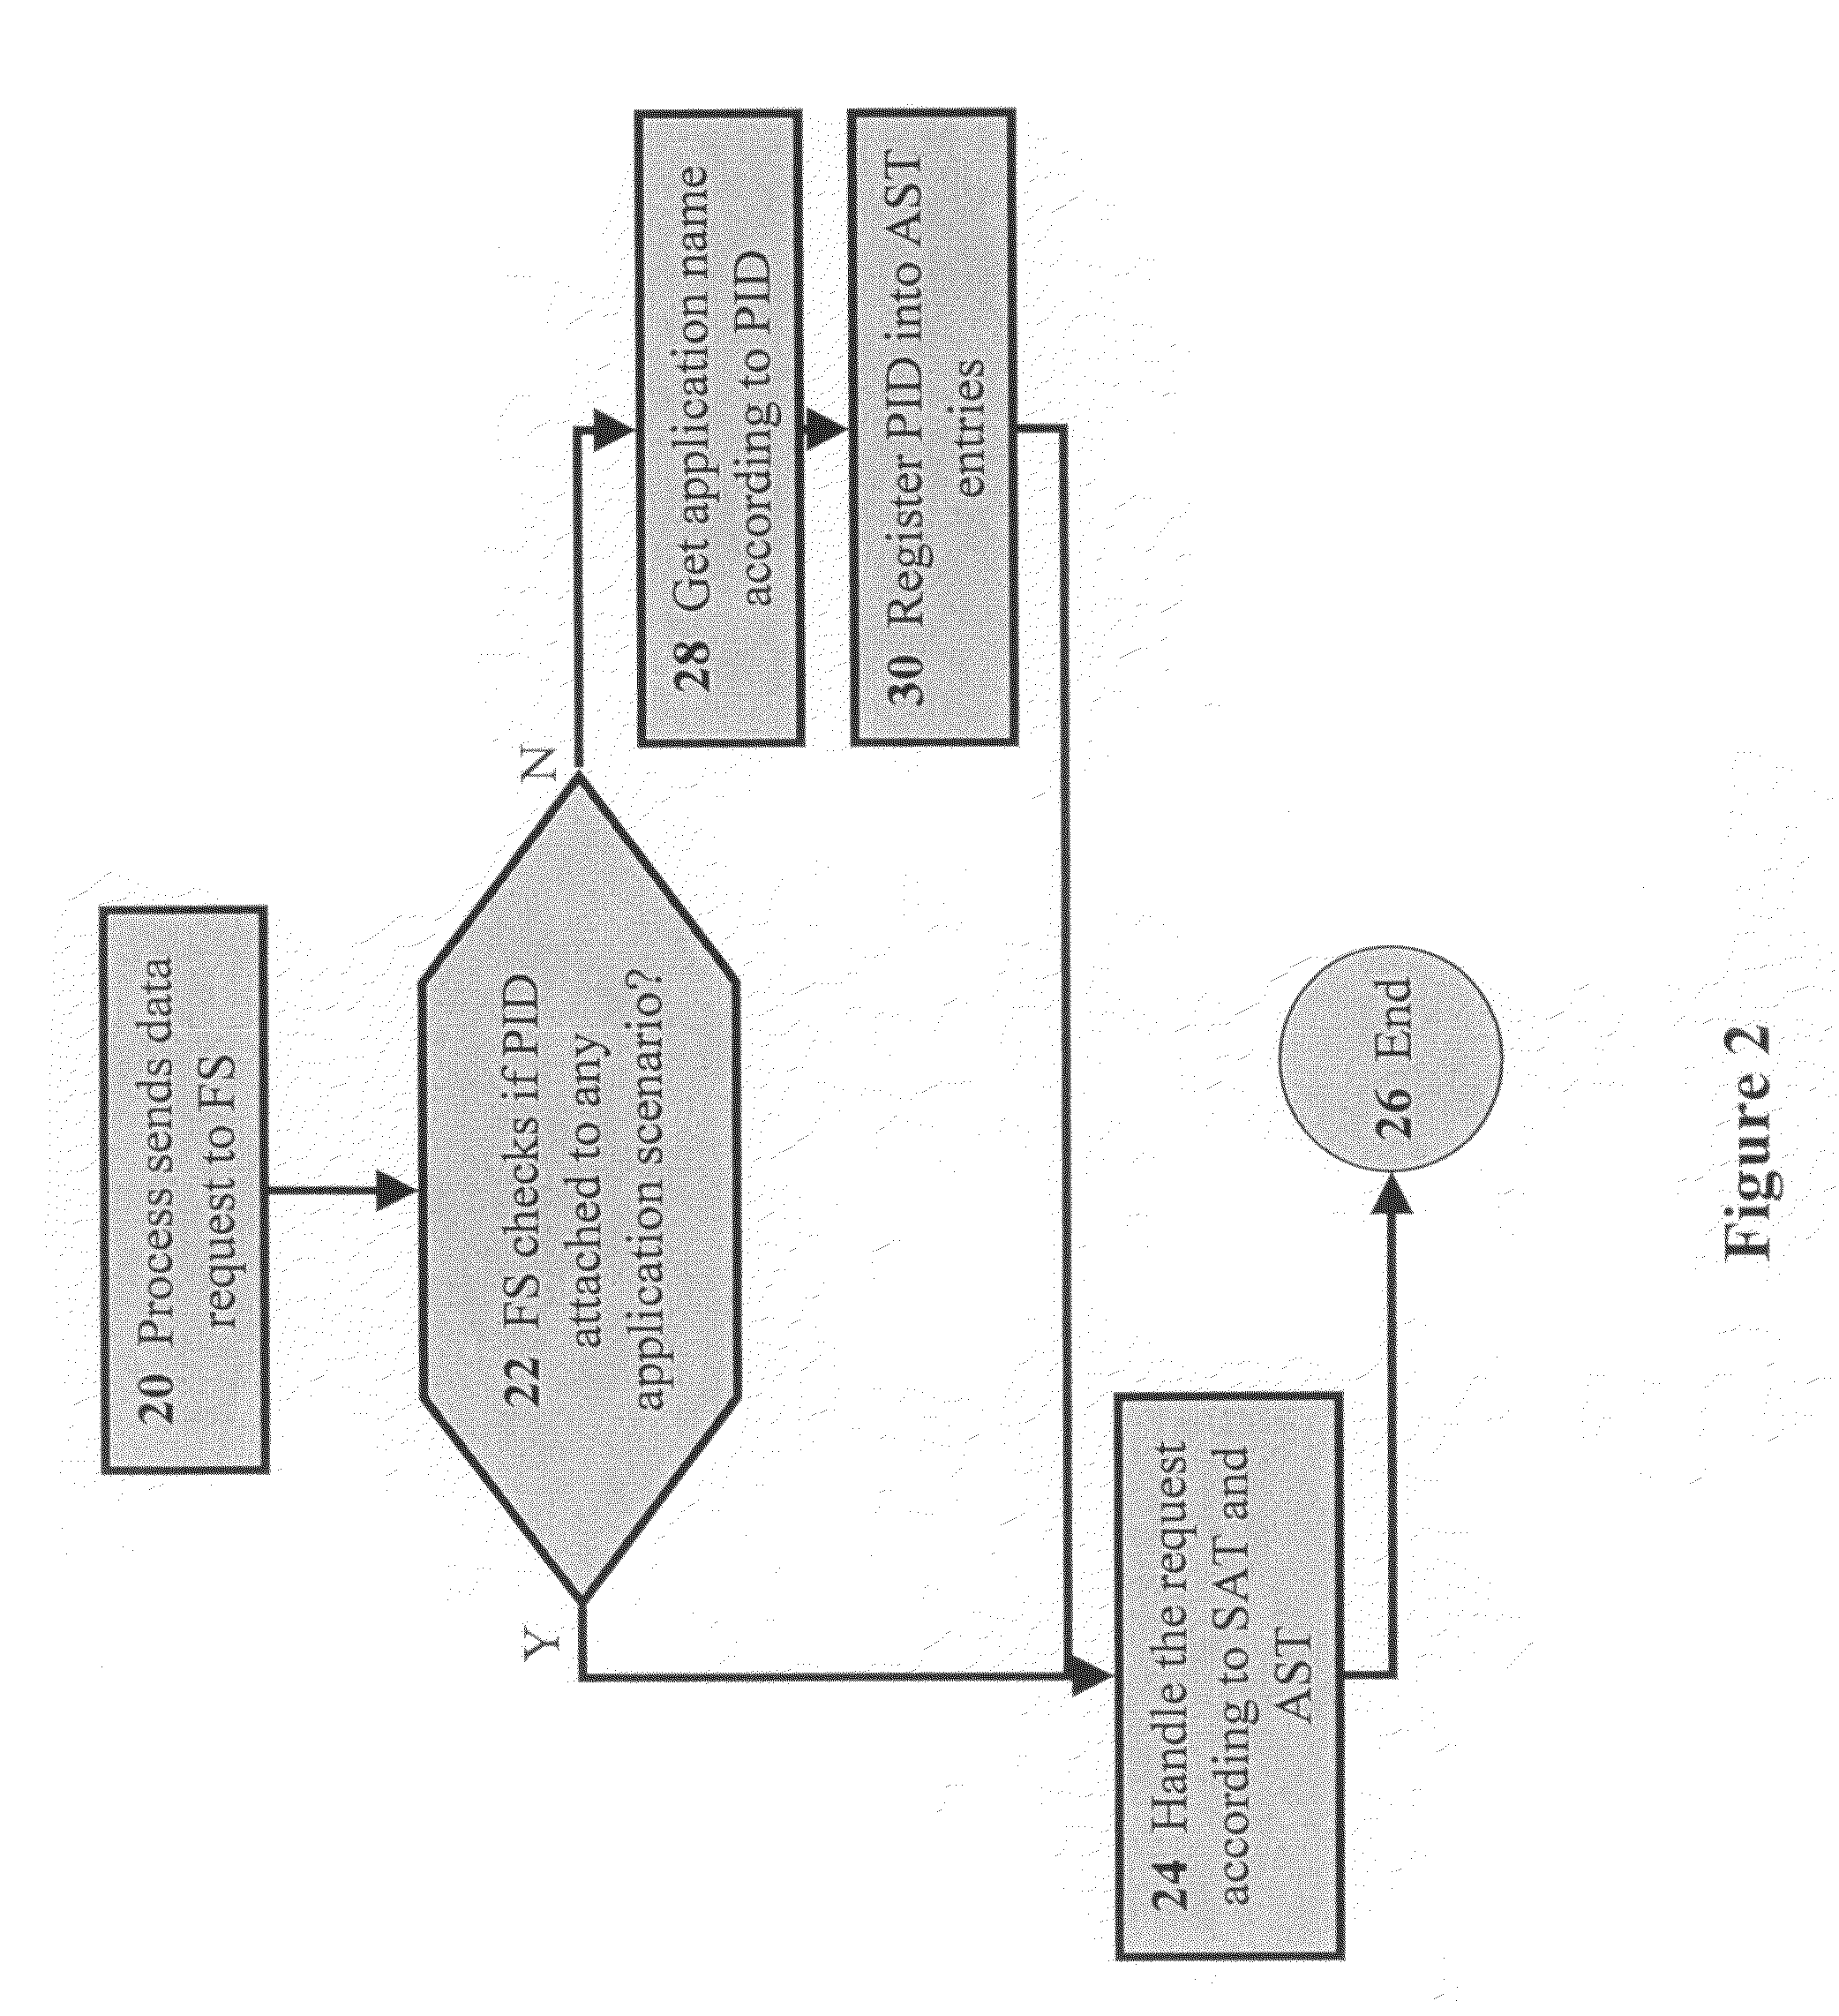 Methods for managing files according to application